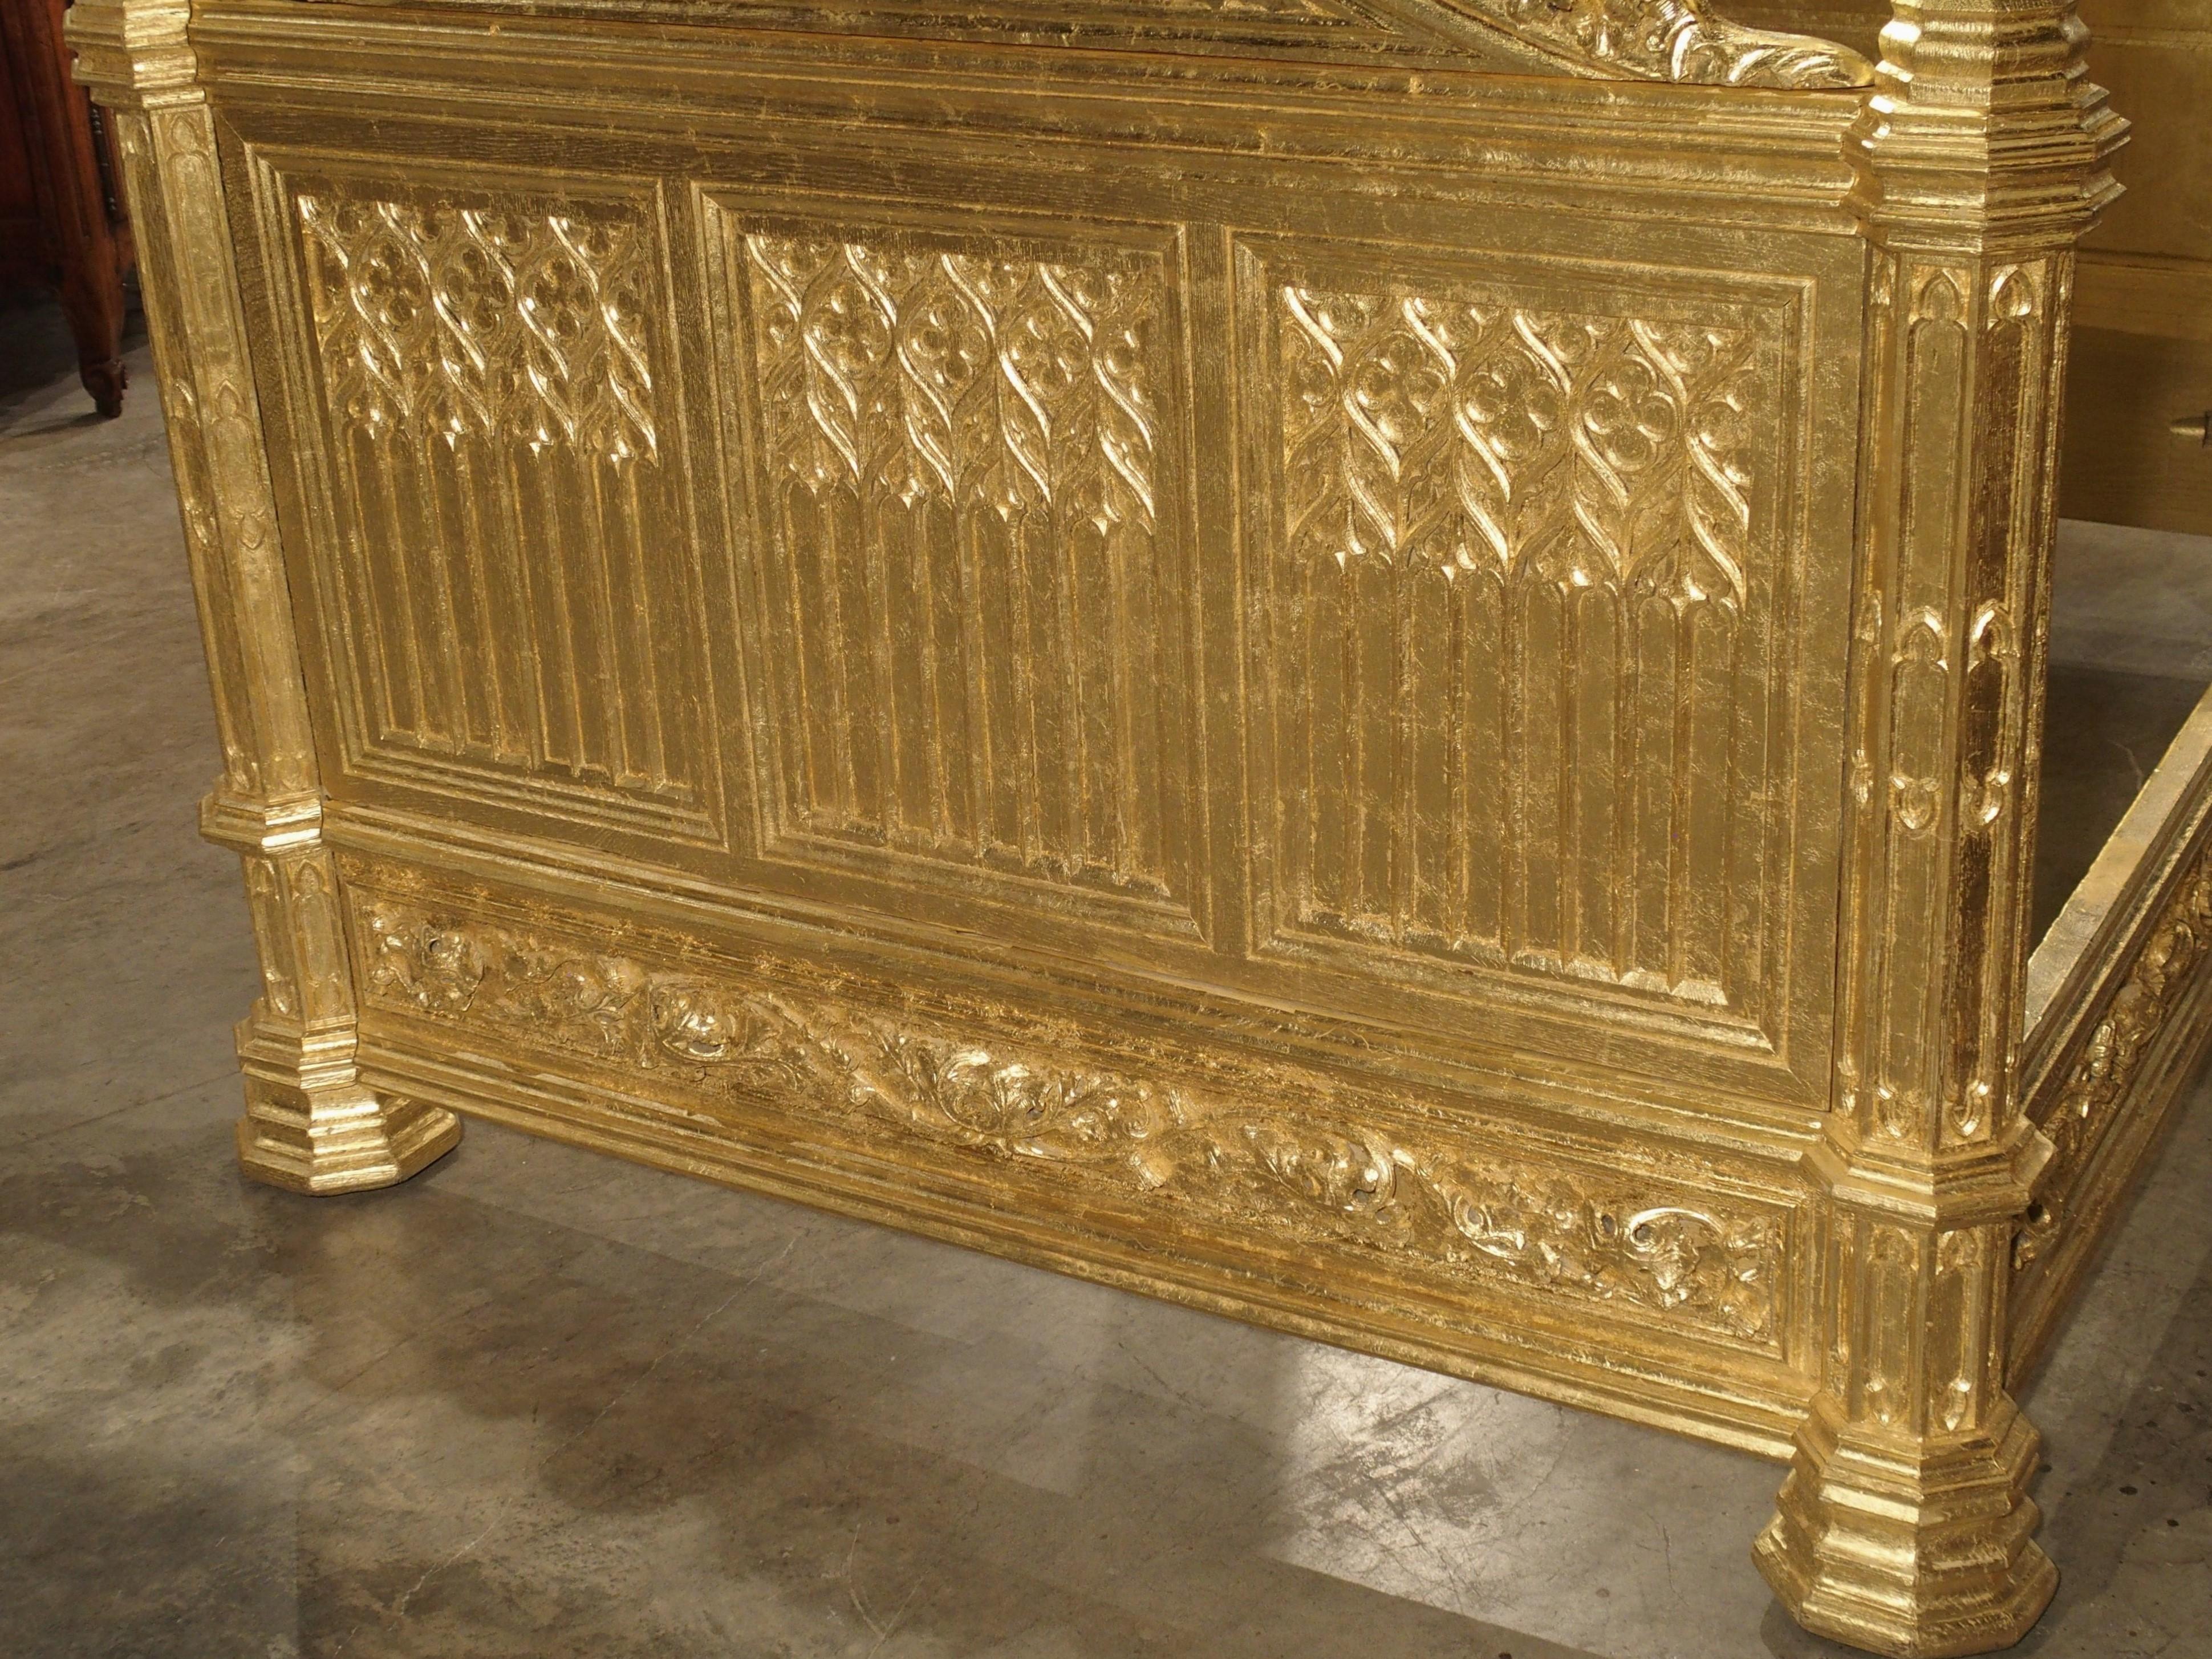 Magnificent Fully Carved Antique French Gothic Bed in 23.5-Karat Gold Leaf 7